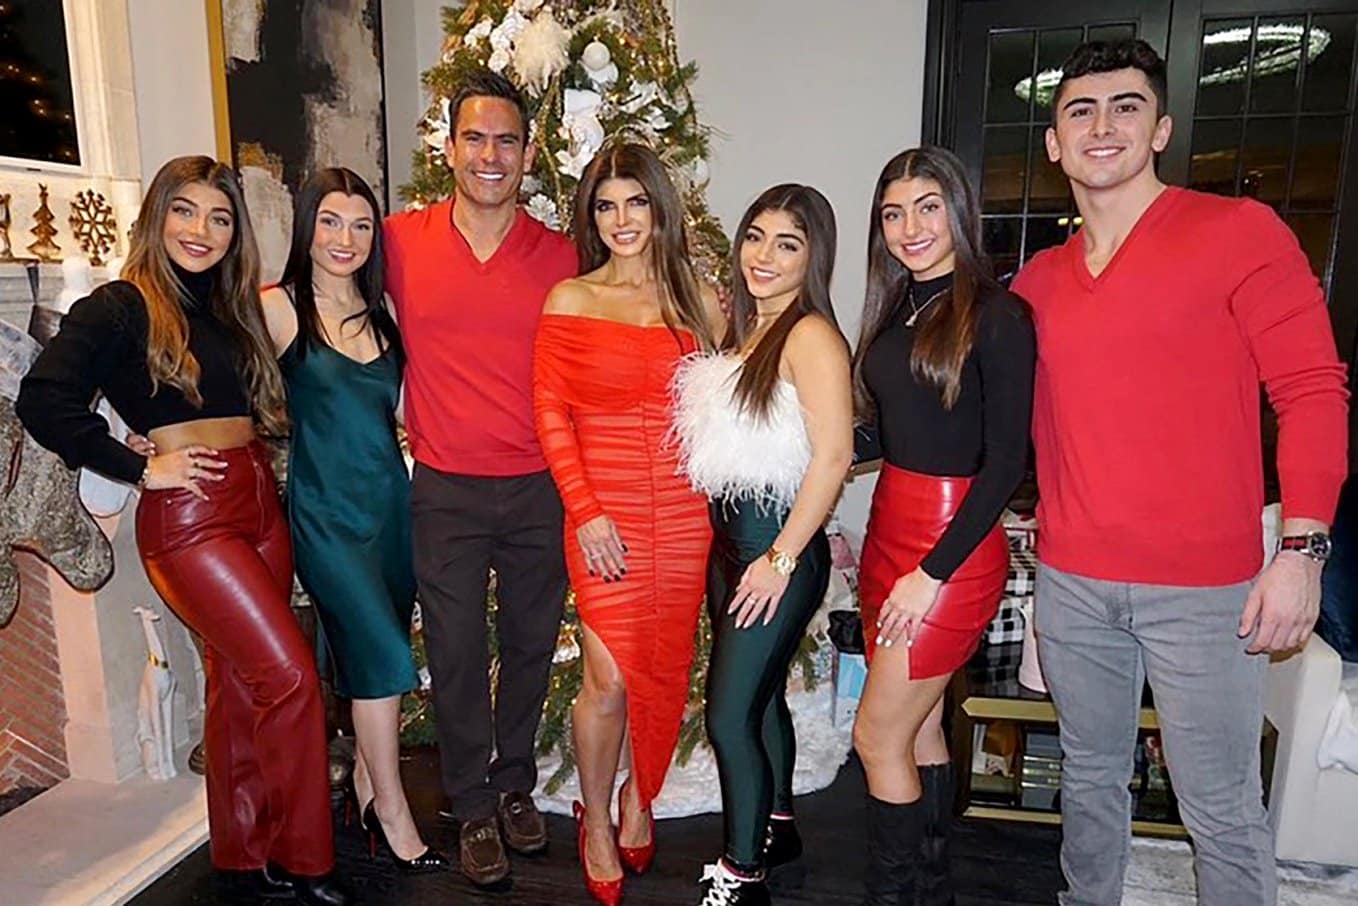 PHOTOS: Luis Ruelas Buys $12,500 Cartier Bracelets For Teresa's Daughters as RHONJ Star Shares Christmas Pics With Their Blended Family